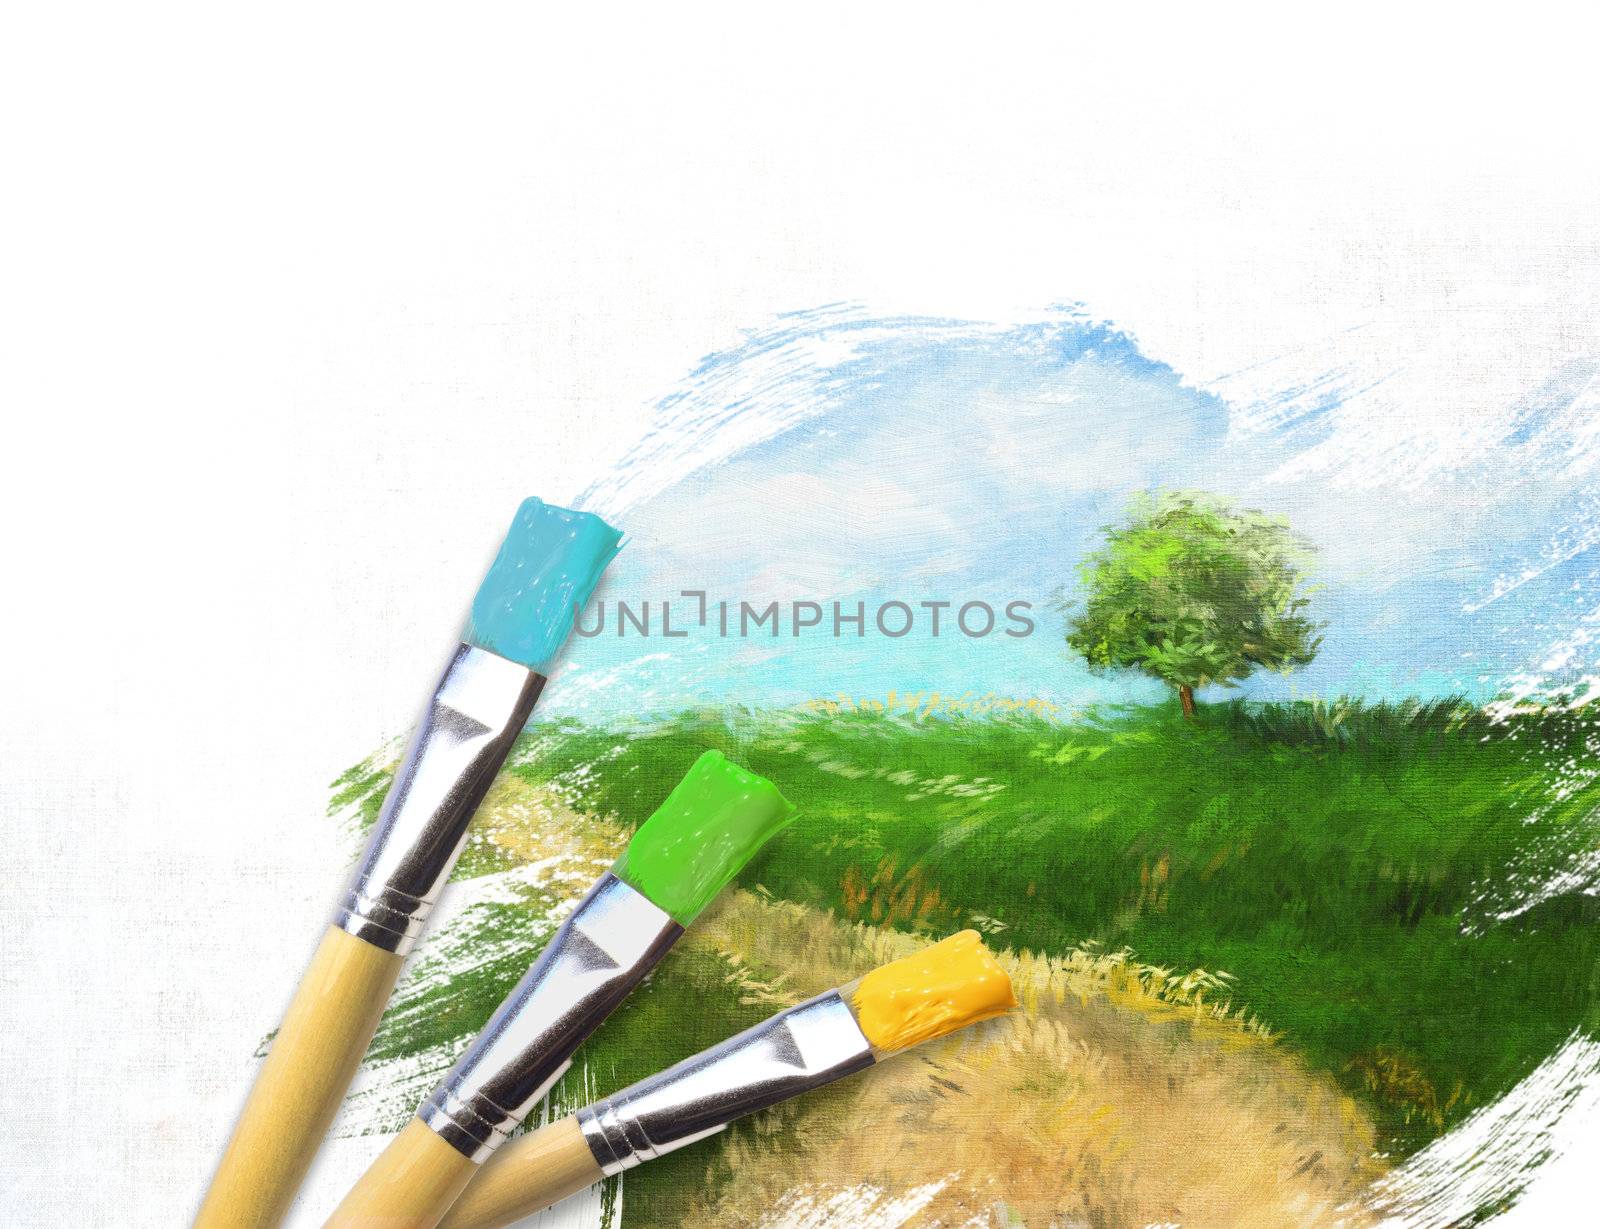 Artist brushes with a half finished painted canvas of rural landscape by Sandralise